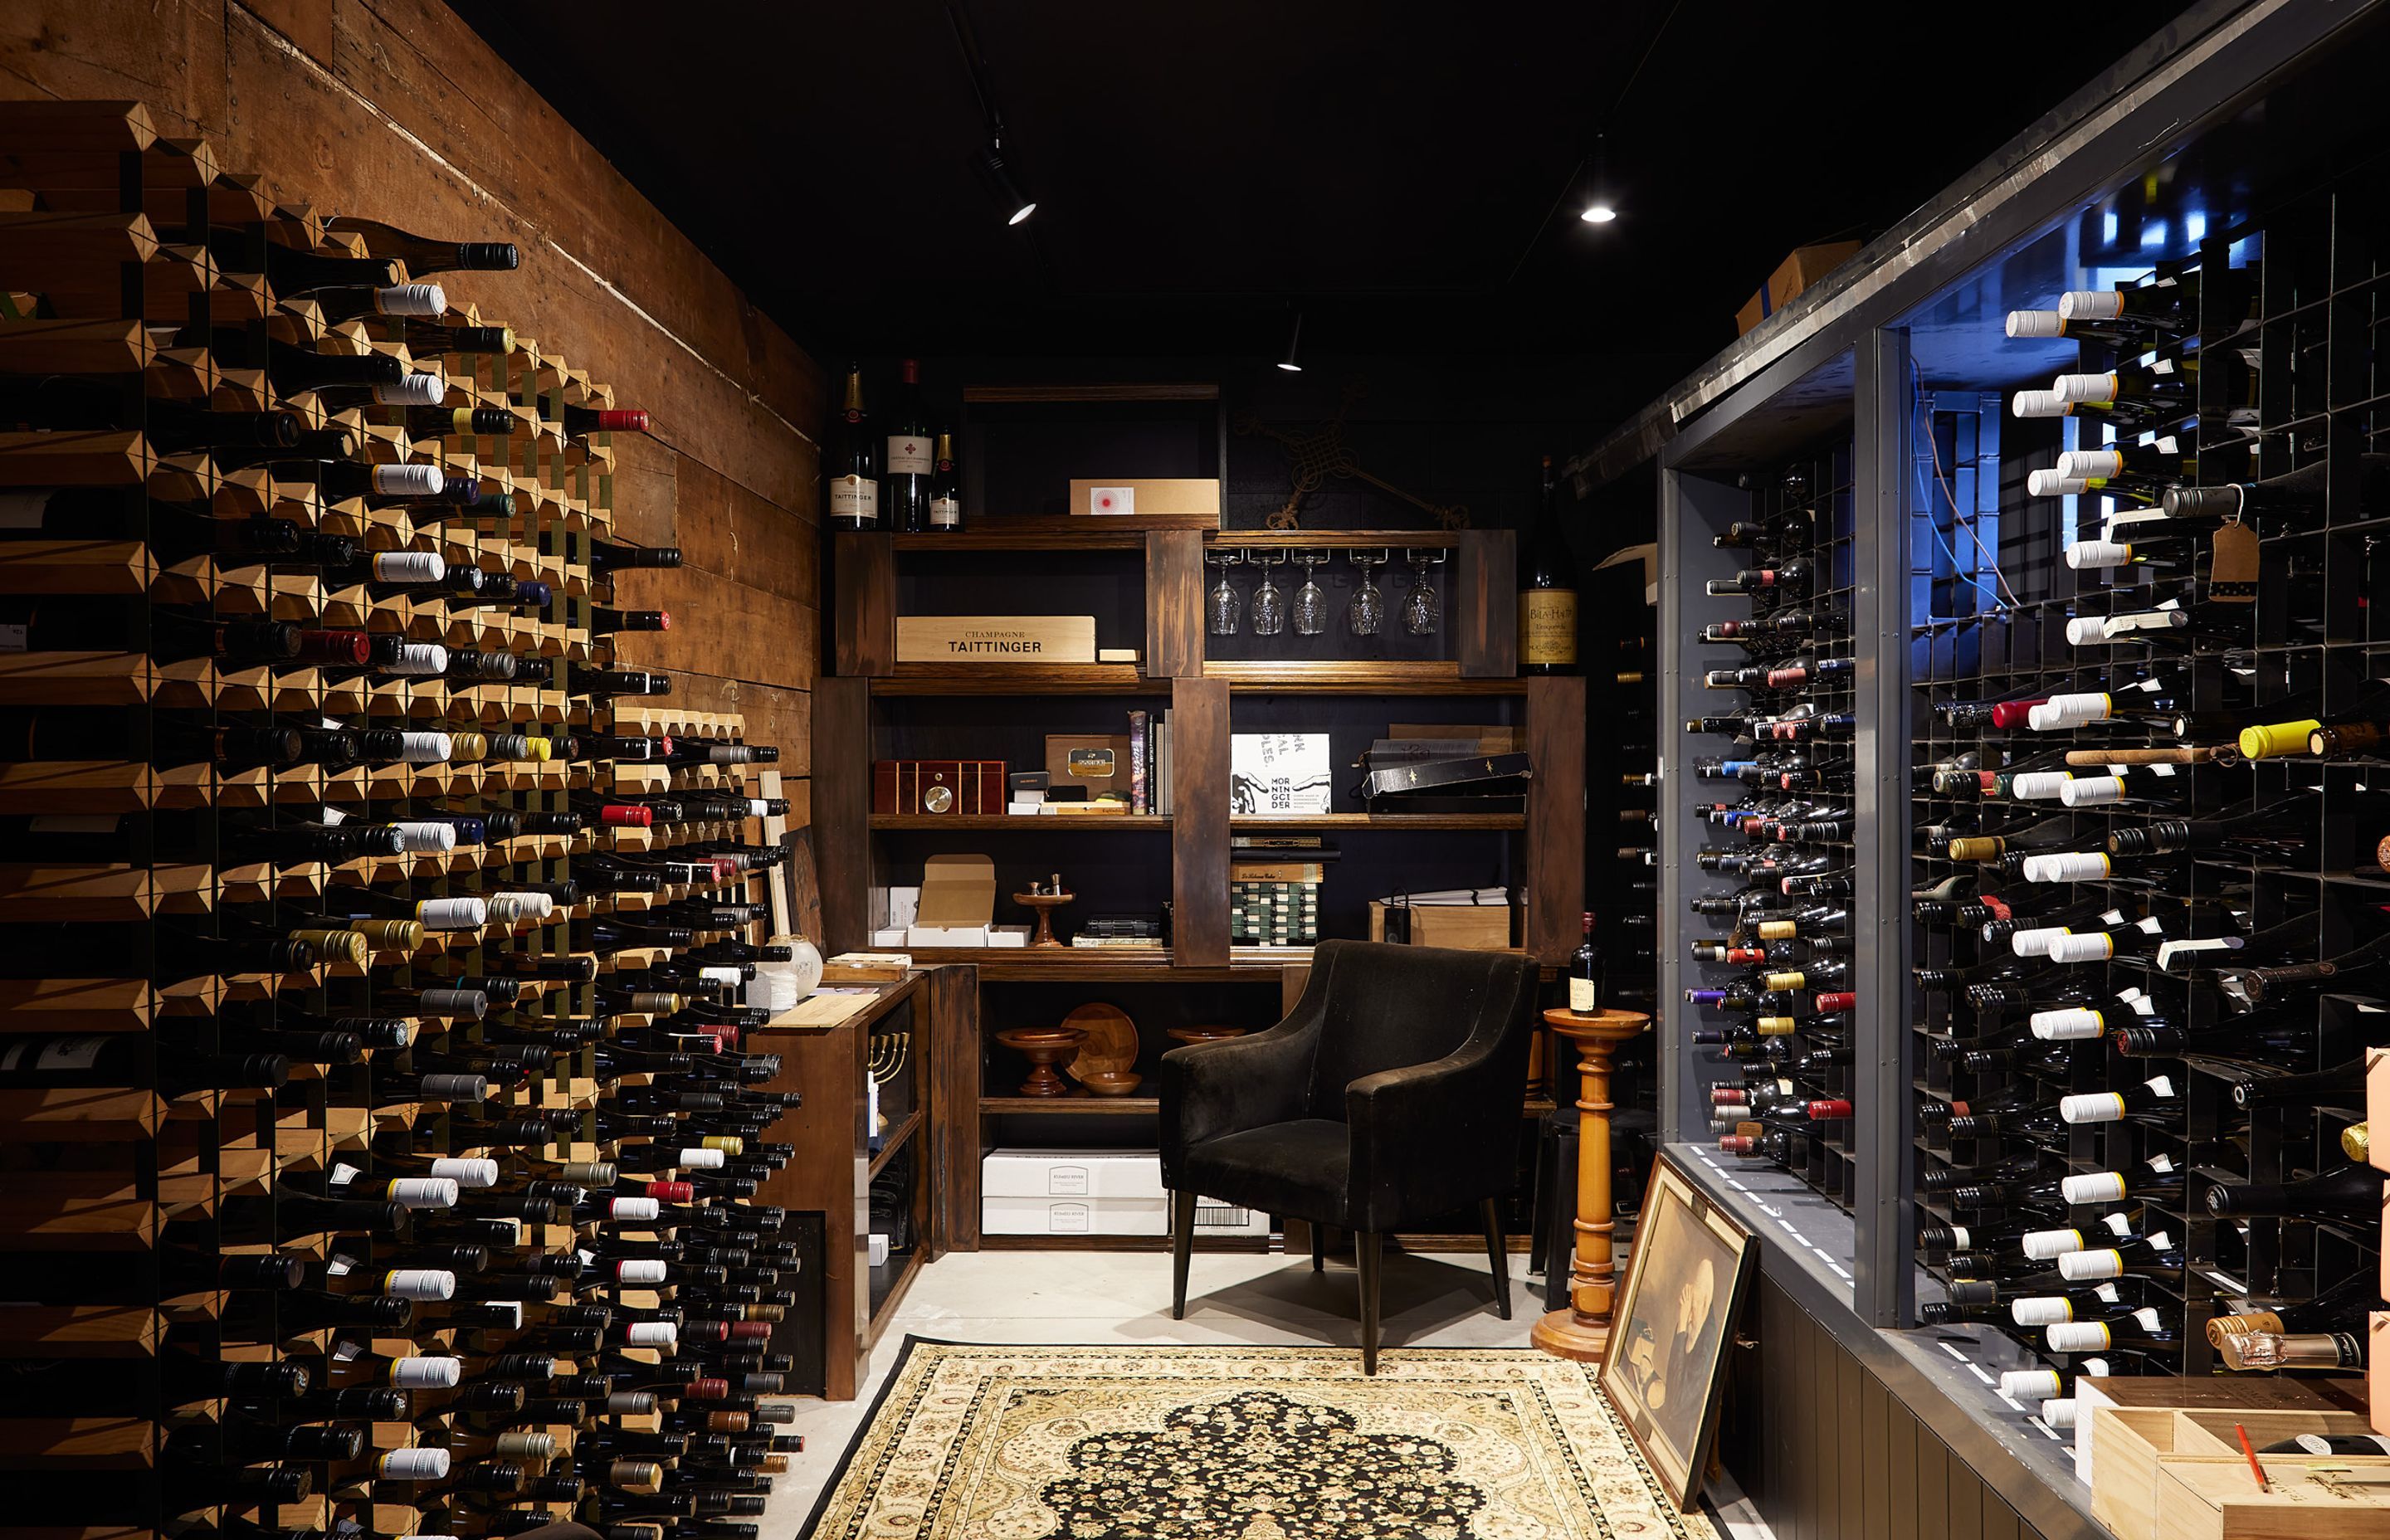 The wine cellar in the basement is a place of retreat designed in contrast to the bright, white upstairs.